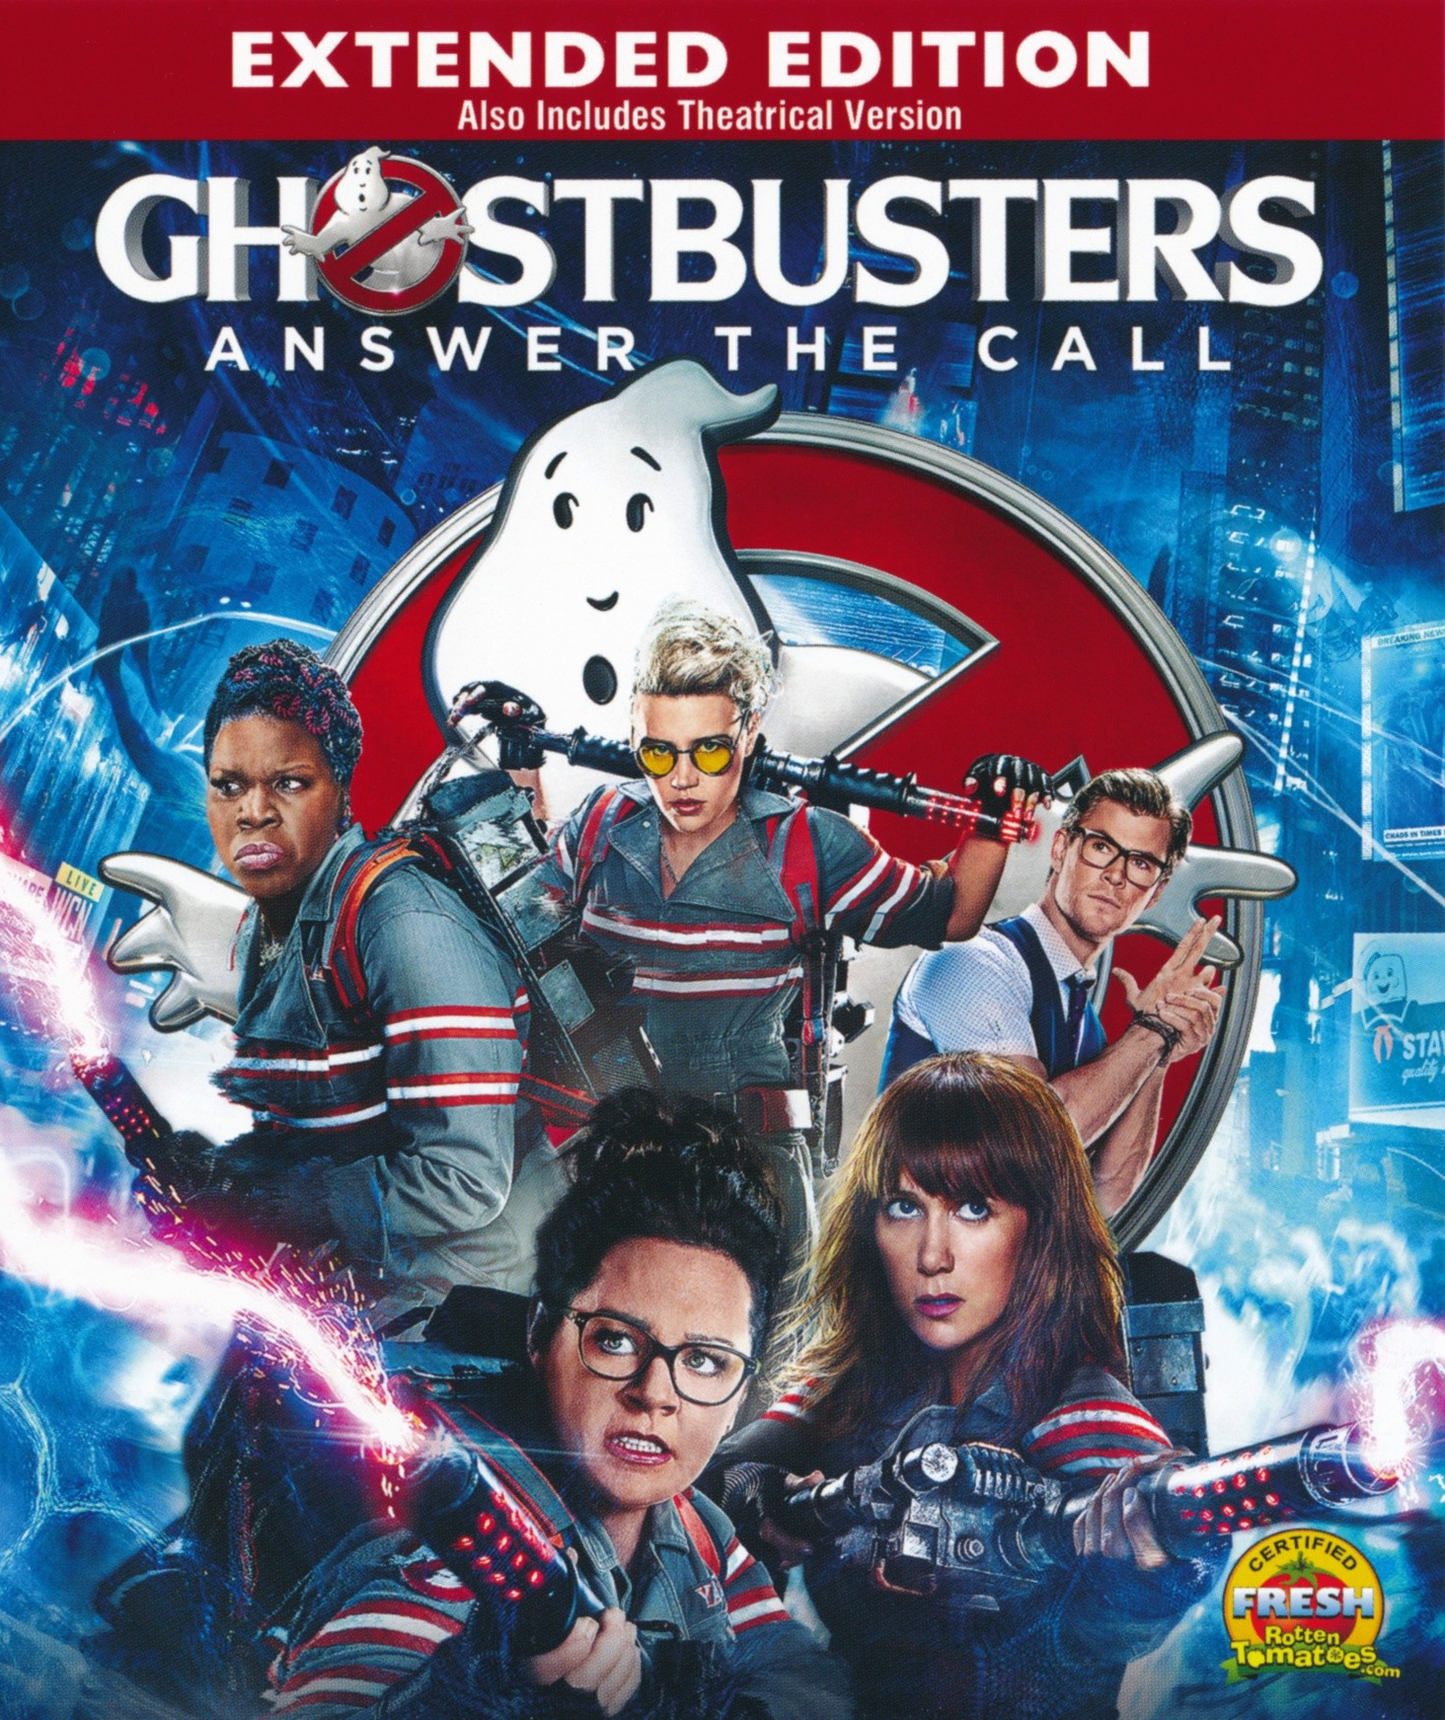 Ghostbusters Answer The Call - Blu-ray Comedy 2016 PG-13